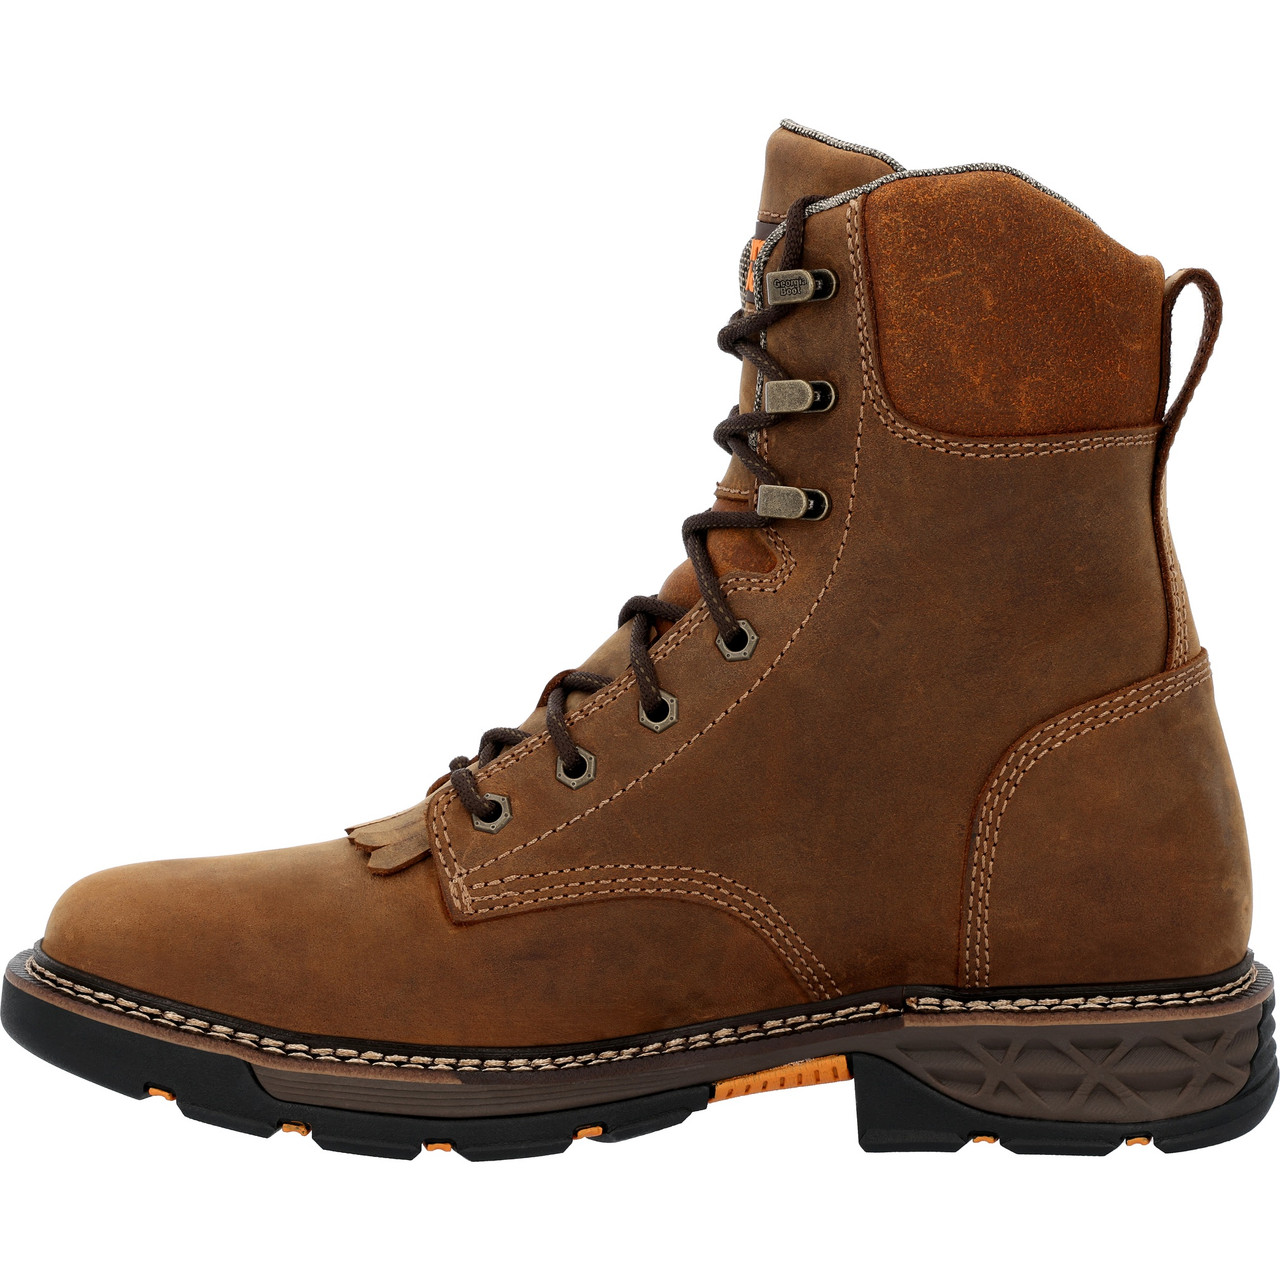 GEORGIA CARBO-TEC FLX WATERPROOF LACER WORK BOOTS GB00623